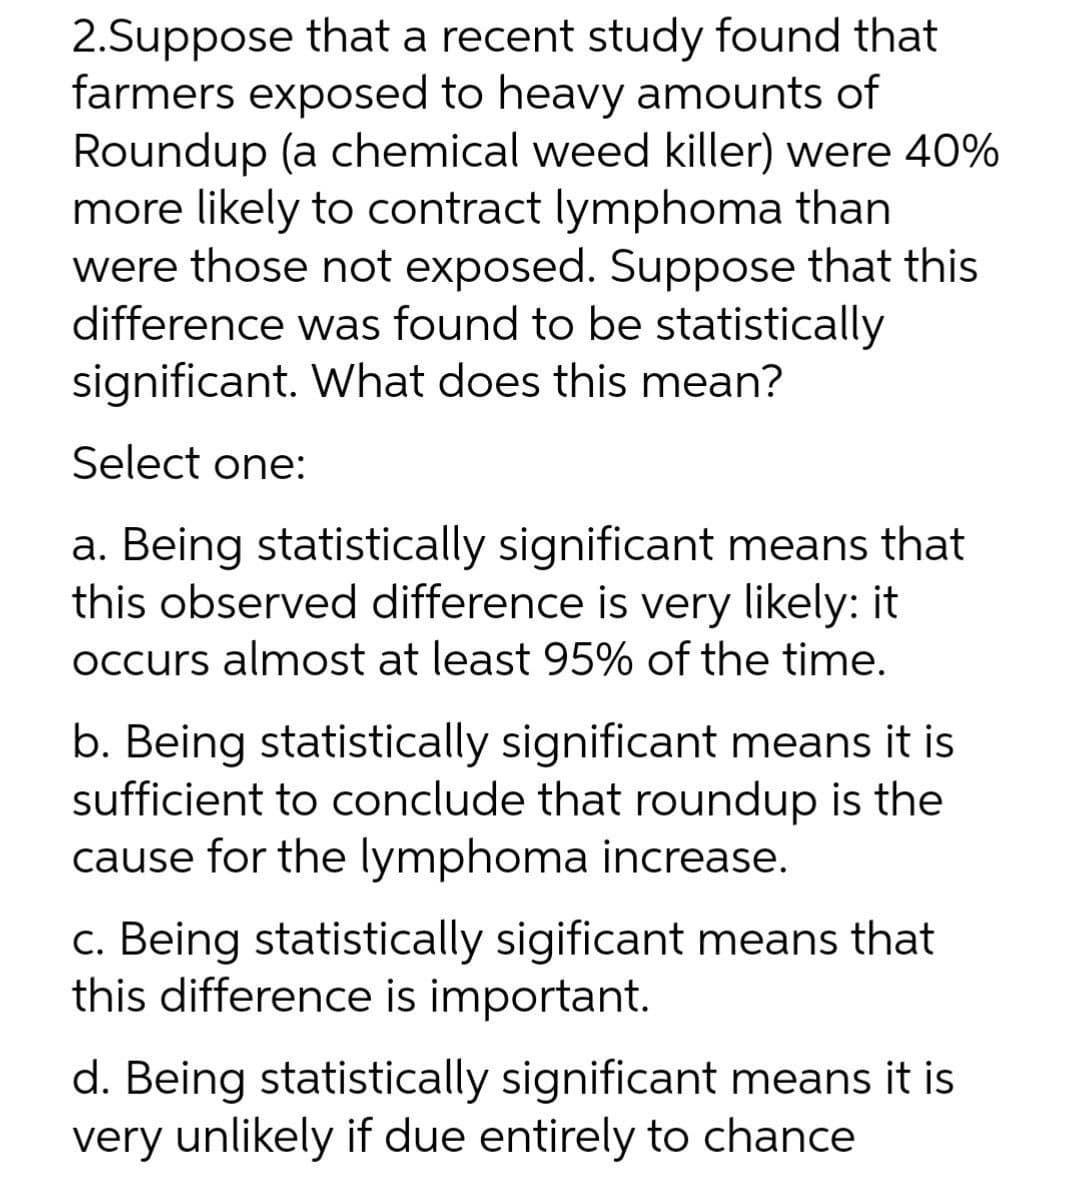 2.Suppose that a recent study found that
farmers exposed to heavy amounts of
Roundup (a chemical weed killer) were 40%
more likely to contract lymphoma than
were those not exposed. Suppose that this
difference was found to be statistically
significant. What does this mean?
Select one:
a. Being statistically significant means that
this observed difference is very likely: it
occurs almost at least 95% of the time.
b. Being statistically significant means it is
sufficient to conclude that roundup is the
cause for the lymphoma increase.
c. Being statistically sigificant means that
this difference is important.
d. Being statistically significant means it is
very unlikely if due entirely to chance
